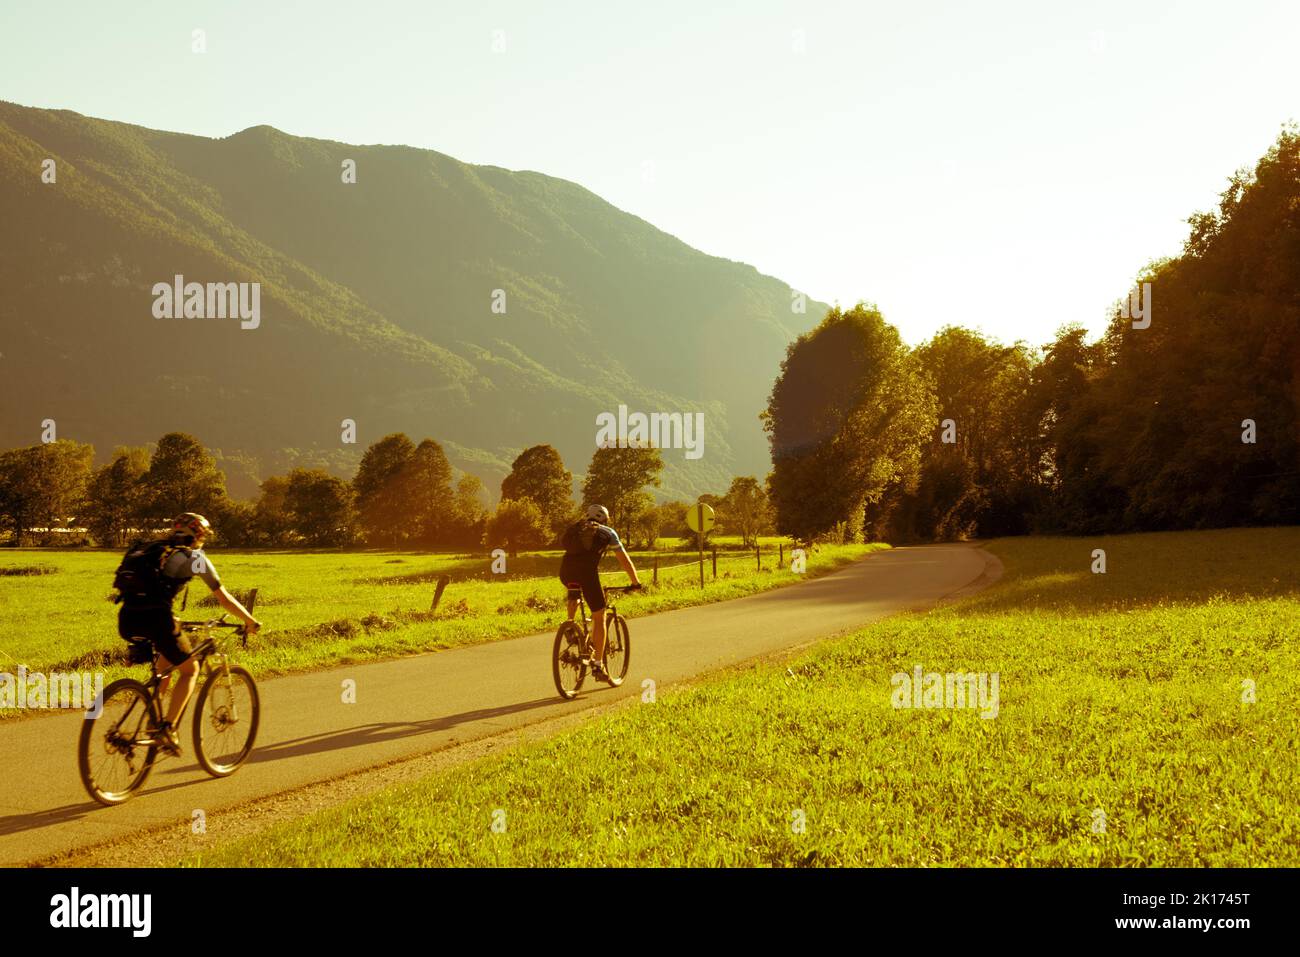 Two person riding bikes in a mountain valley Stock Photo